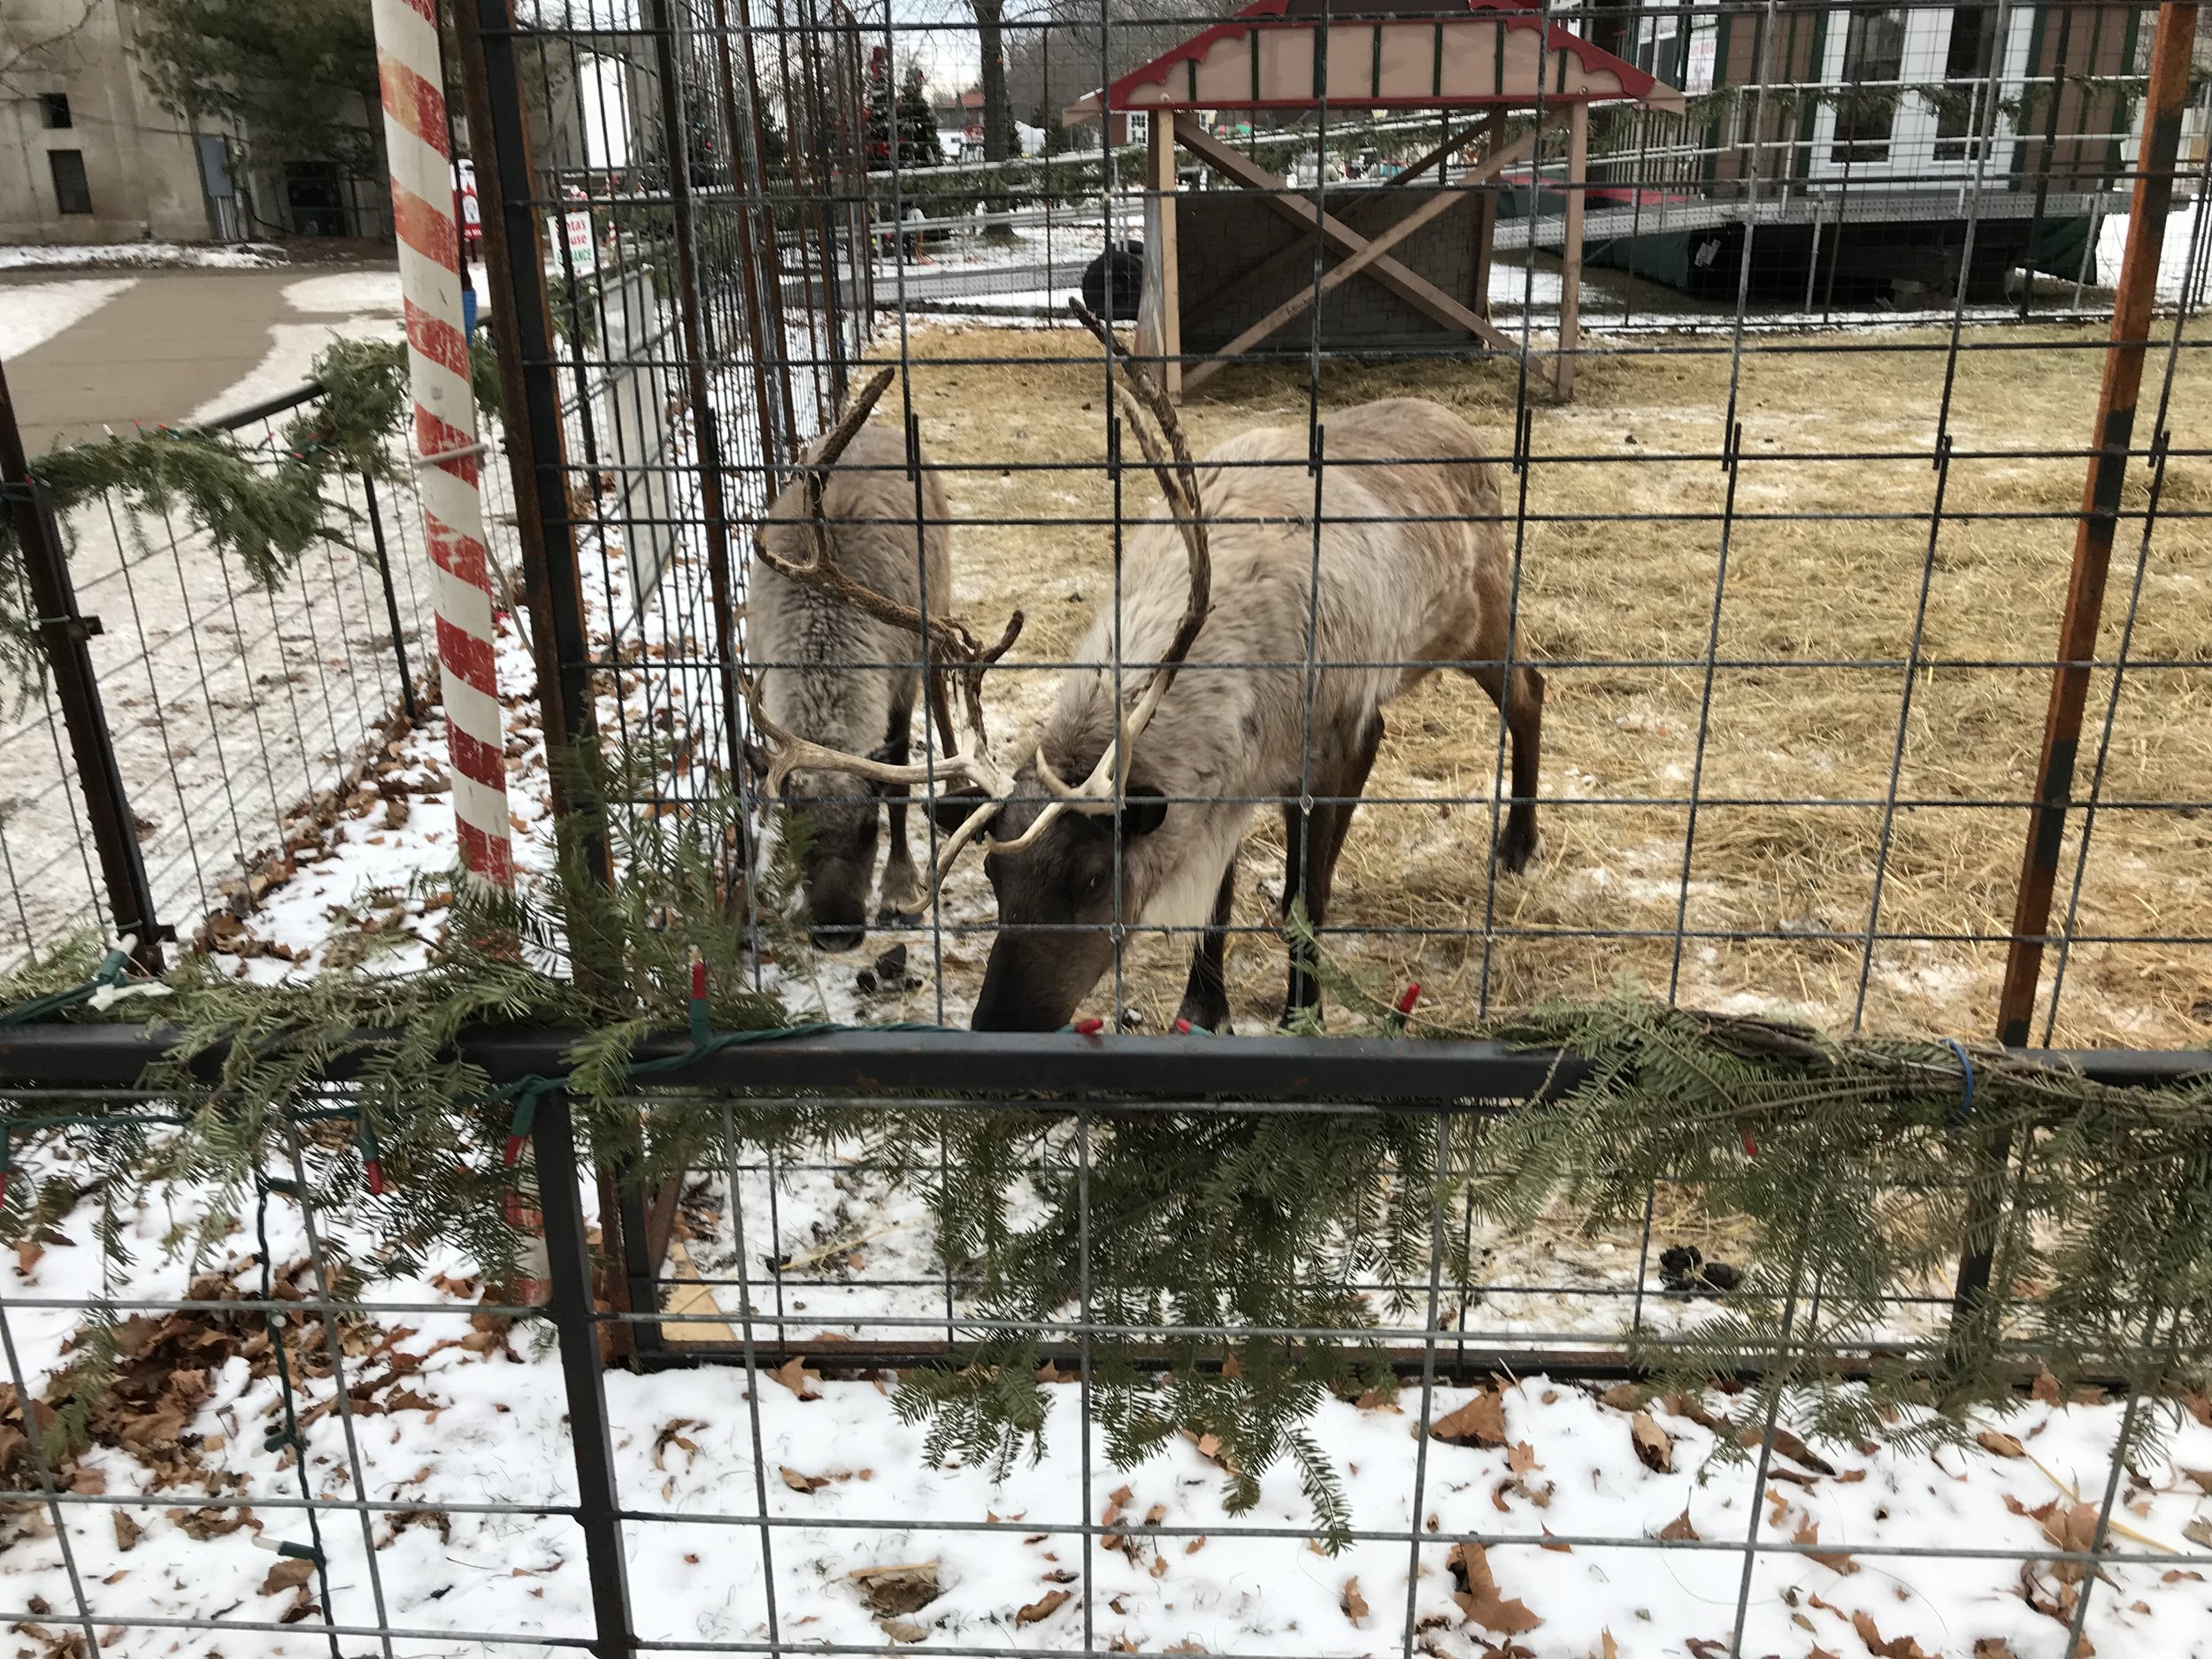 Holiday decorations in the park - La Crosse, WI - Live reindeer 